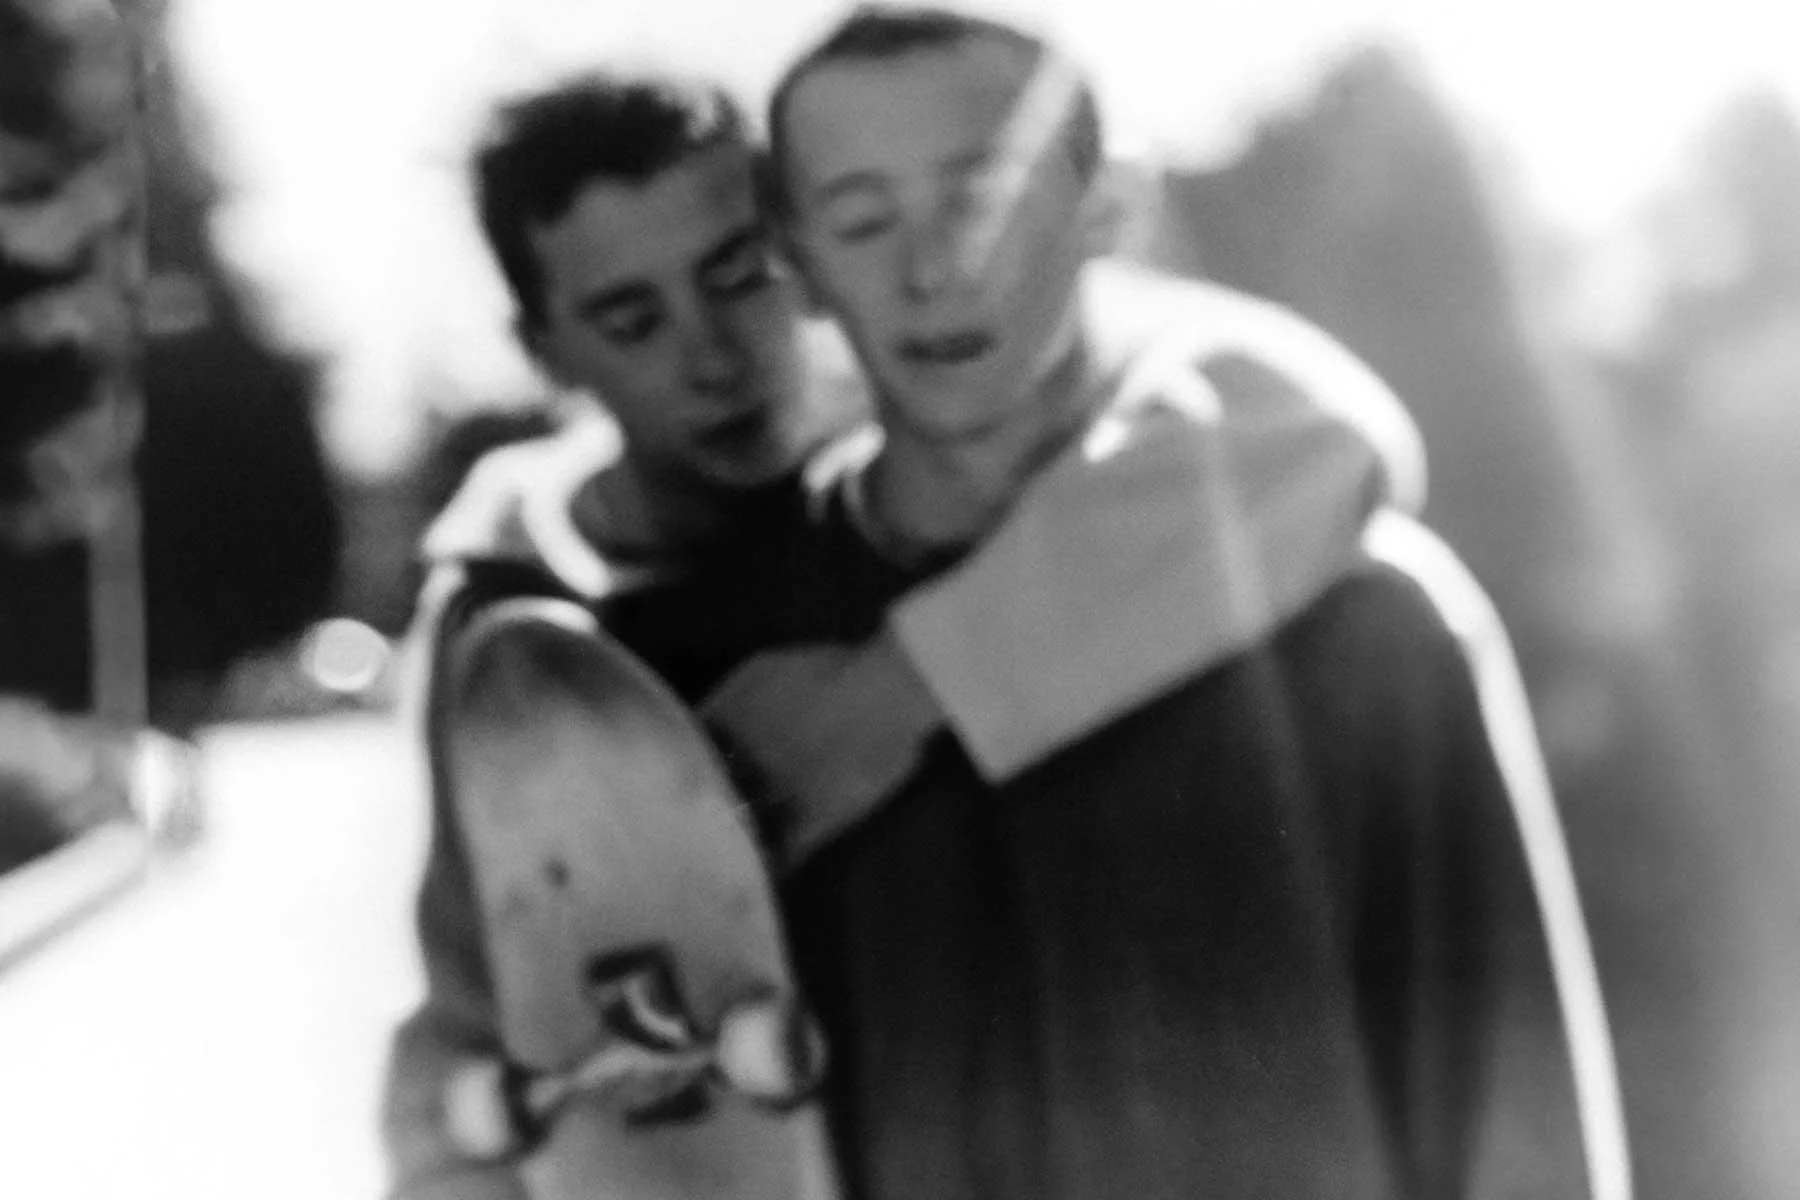 A black-and-white AI-generated photograph showing two people embracing, one with a skateboard in his hand, with sunlight shining into the camera’s lens from behind them